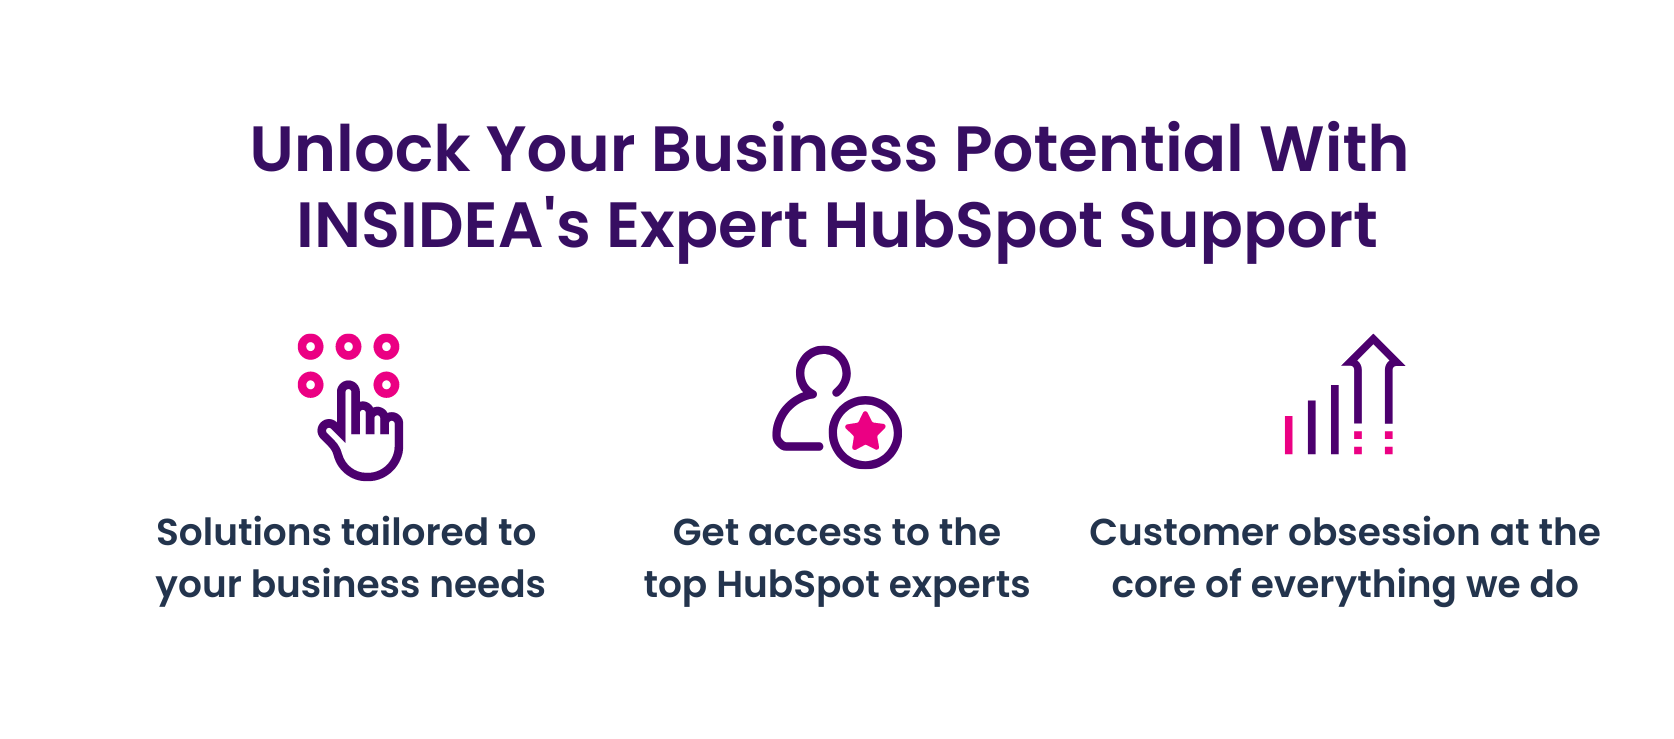 Unlock Your Business Potential with Expert HubSpot Support